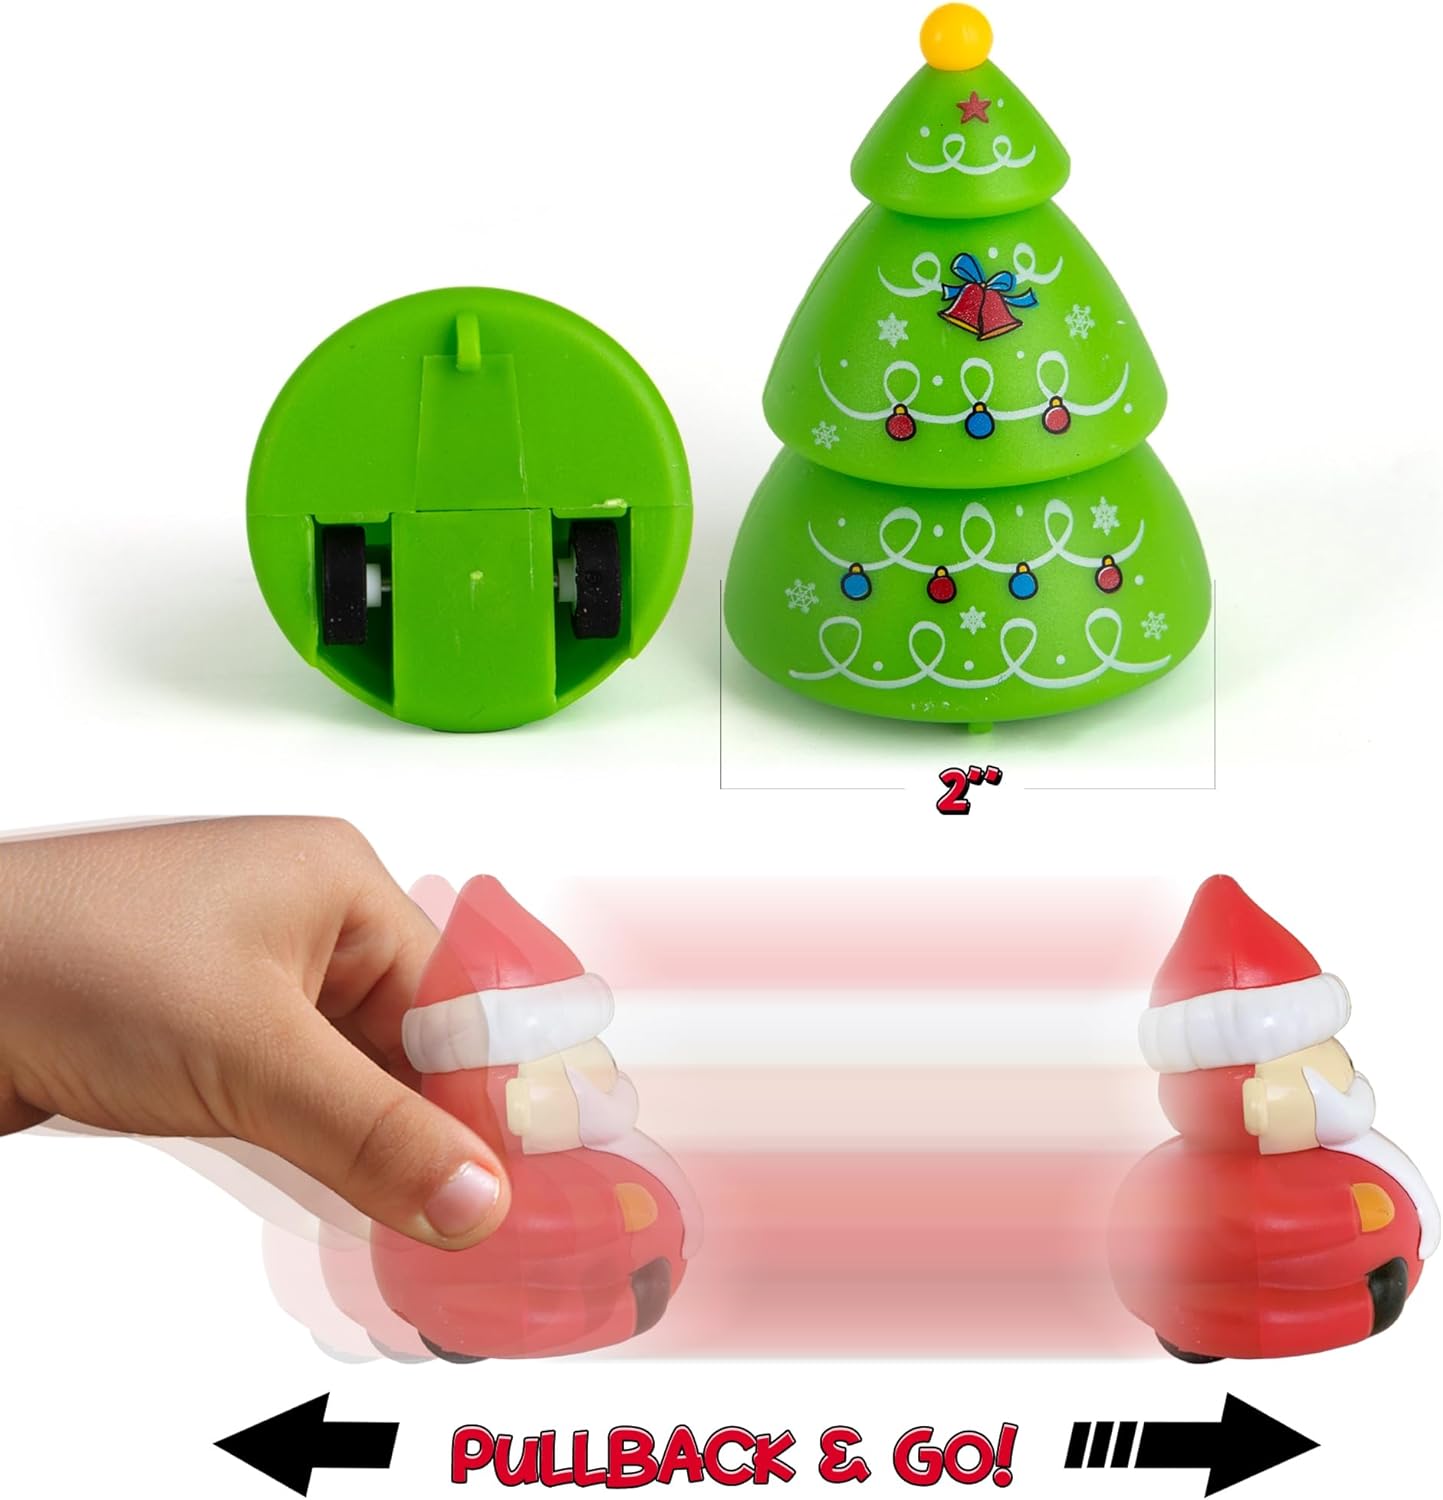 Christmas Pull Back Cars - Set of 6 Pull Back Cars - Pull Back Toys for Kids in Xmas Designs